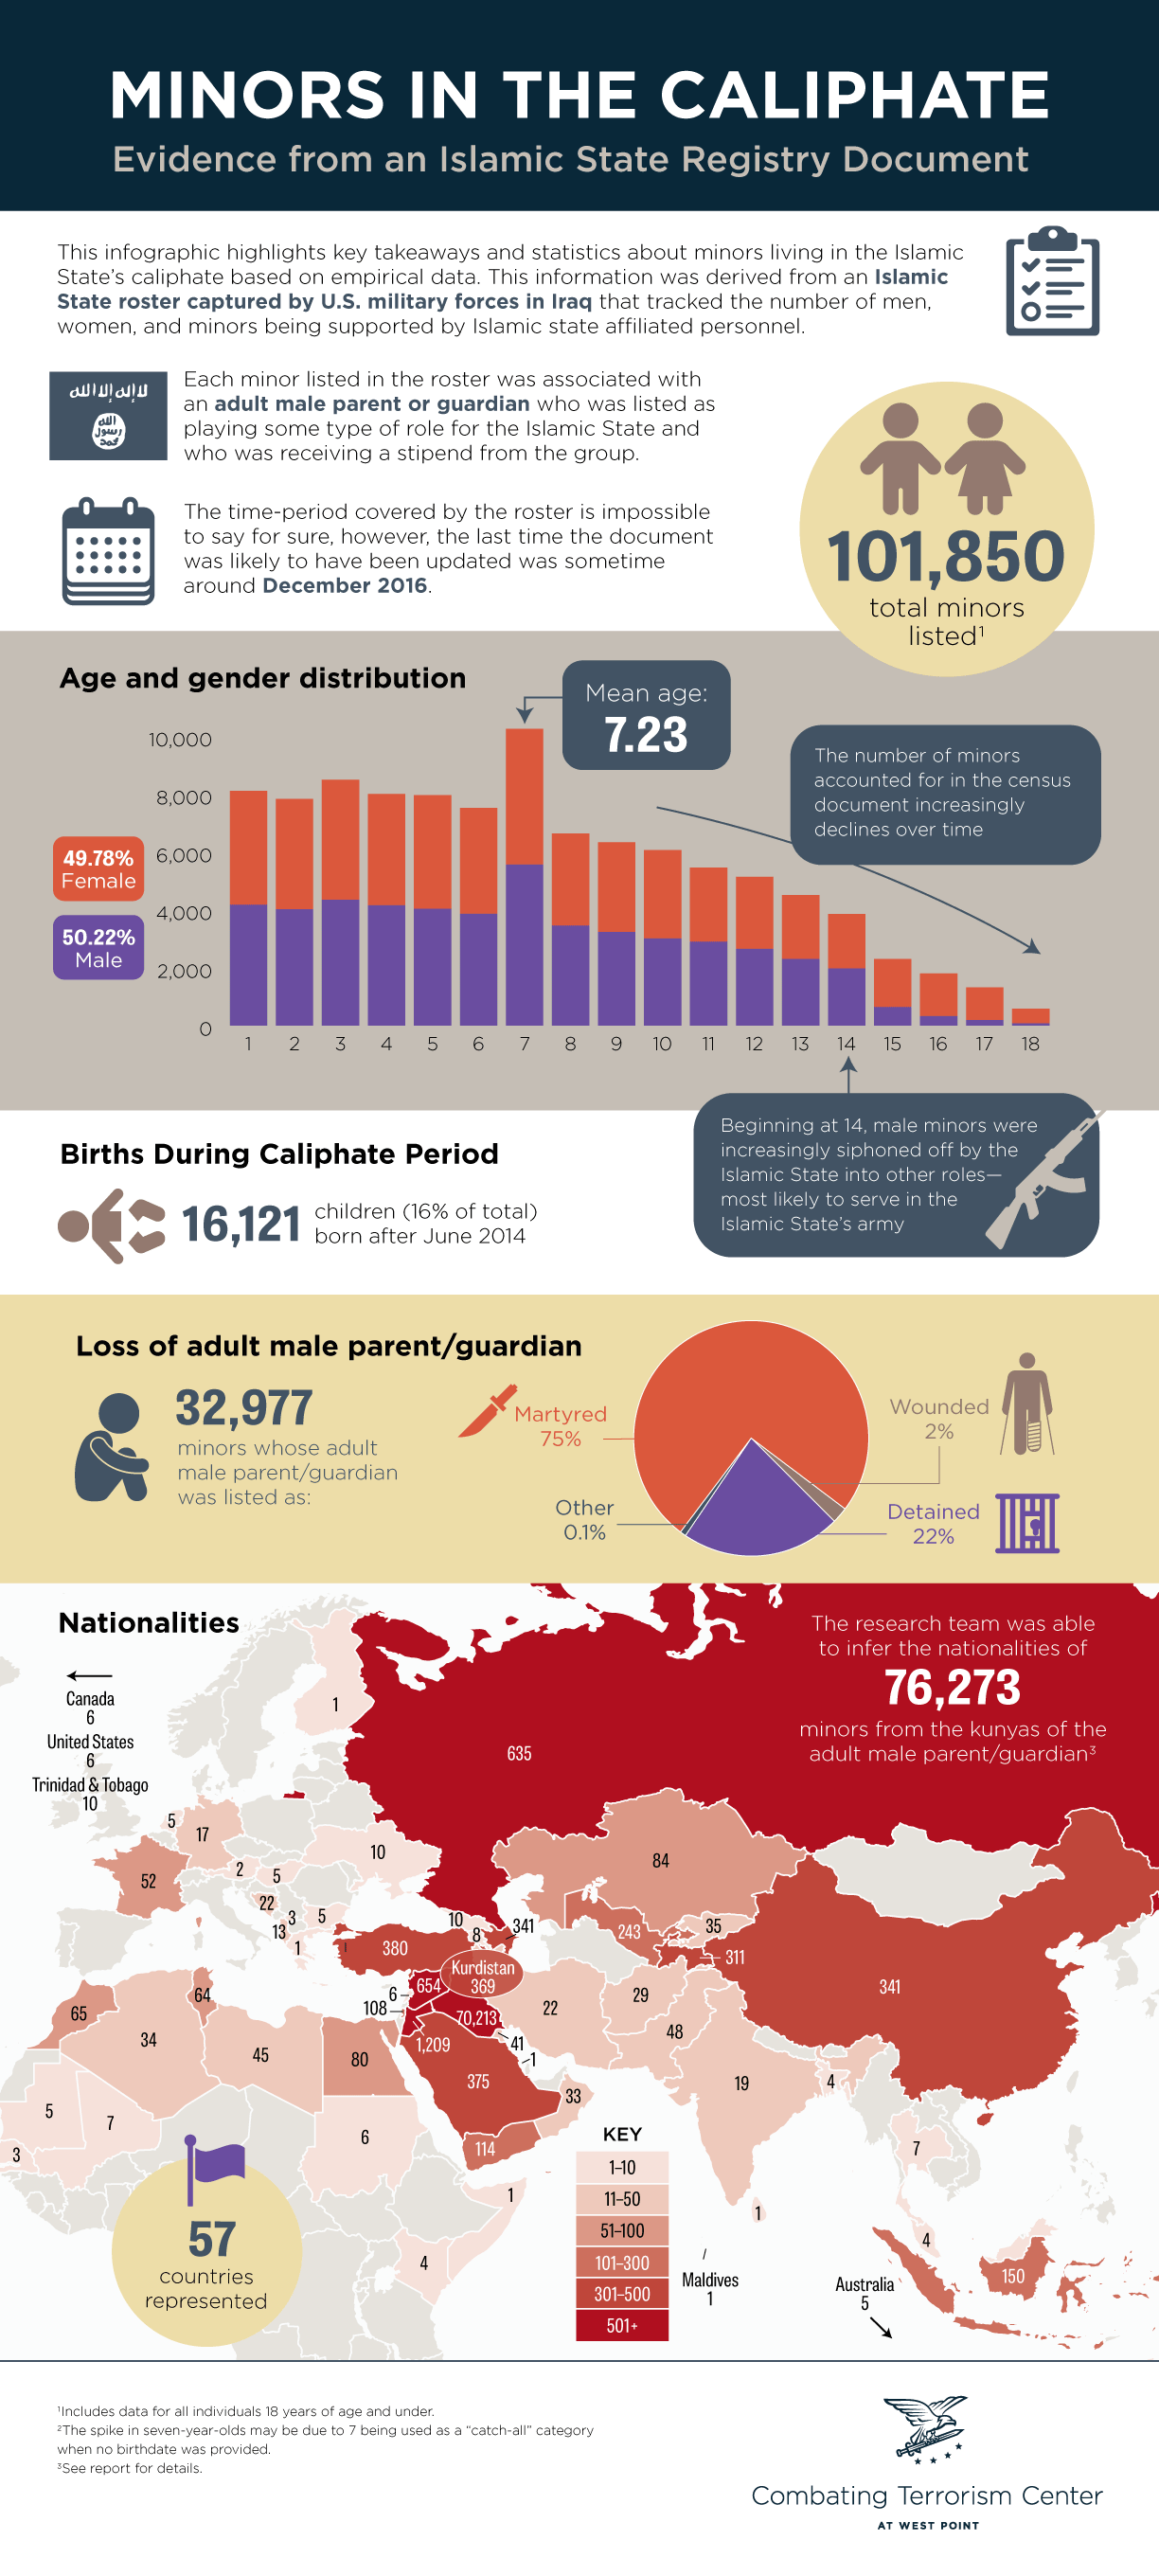 Minors in the Caliphate infographic image with charts and maps and stuff